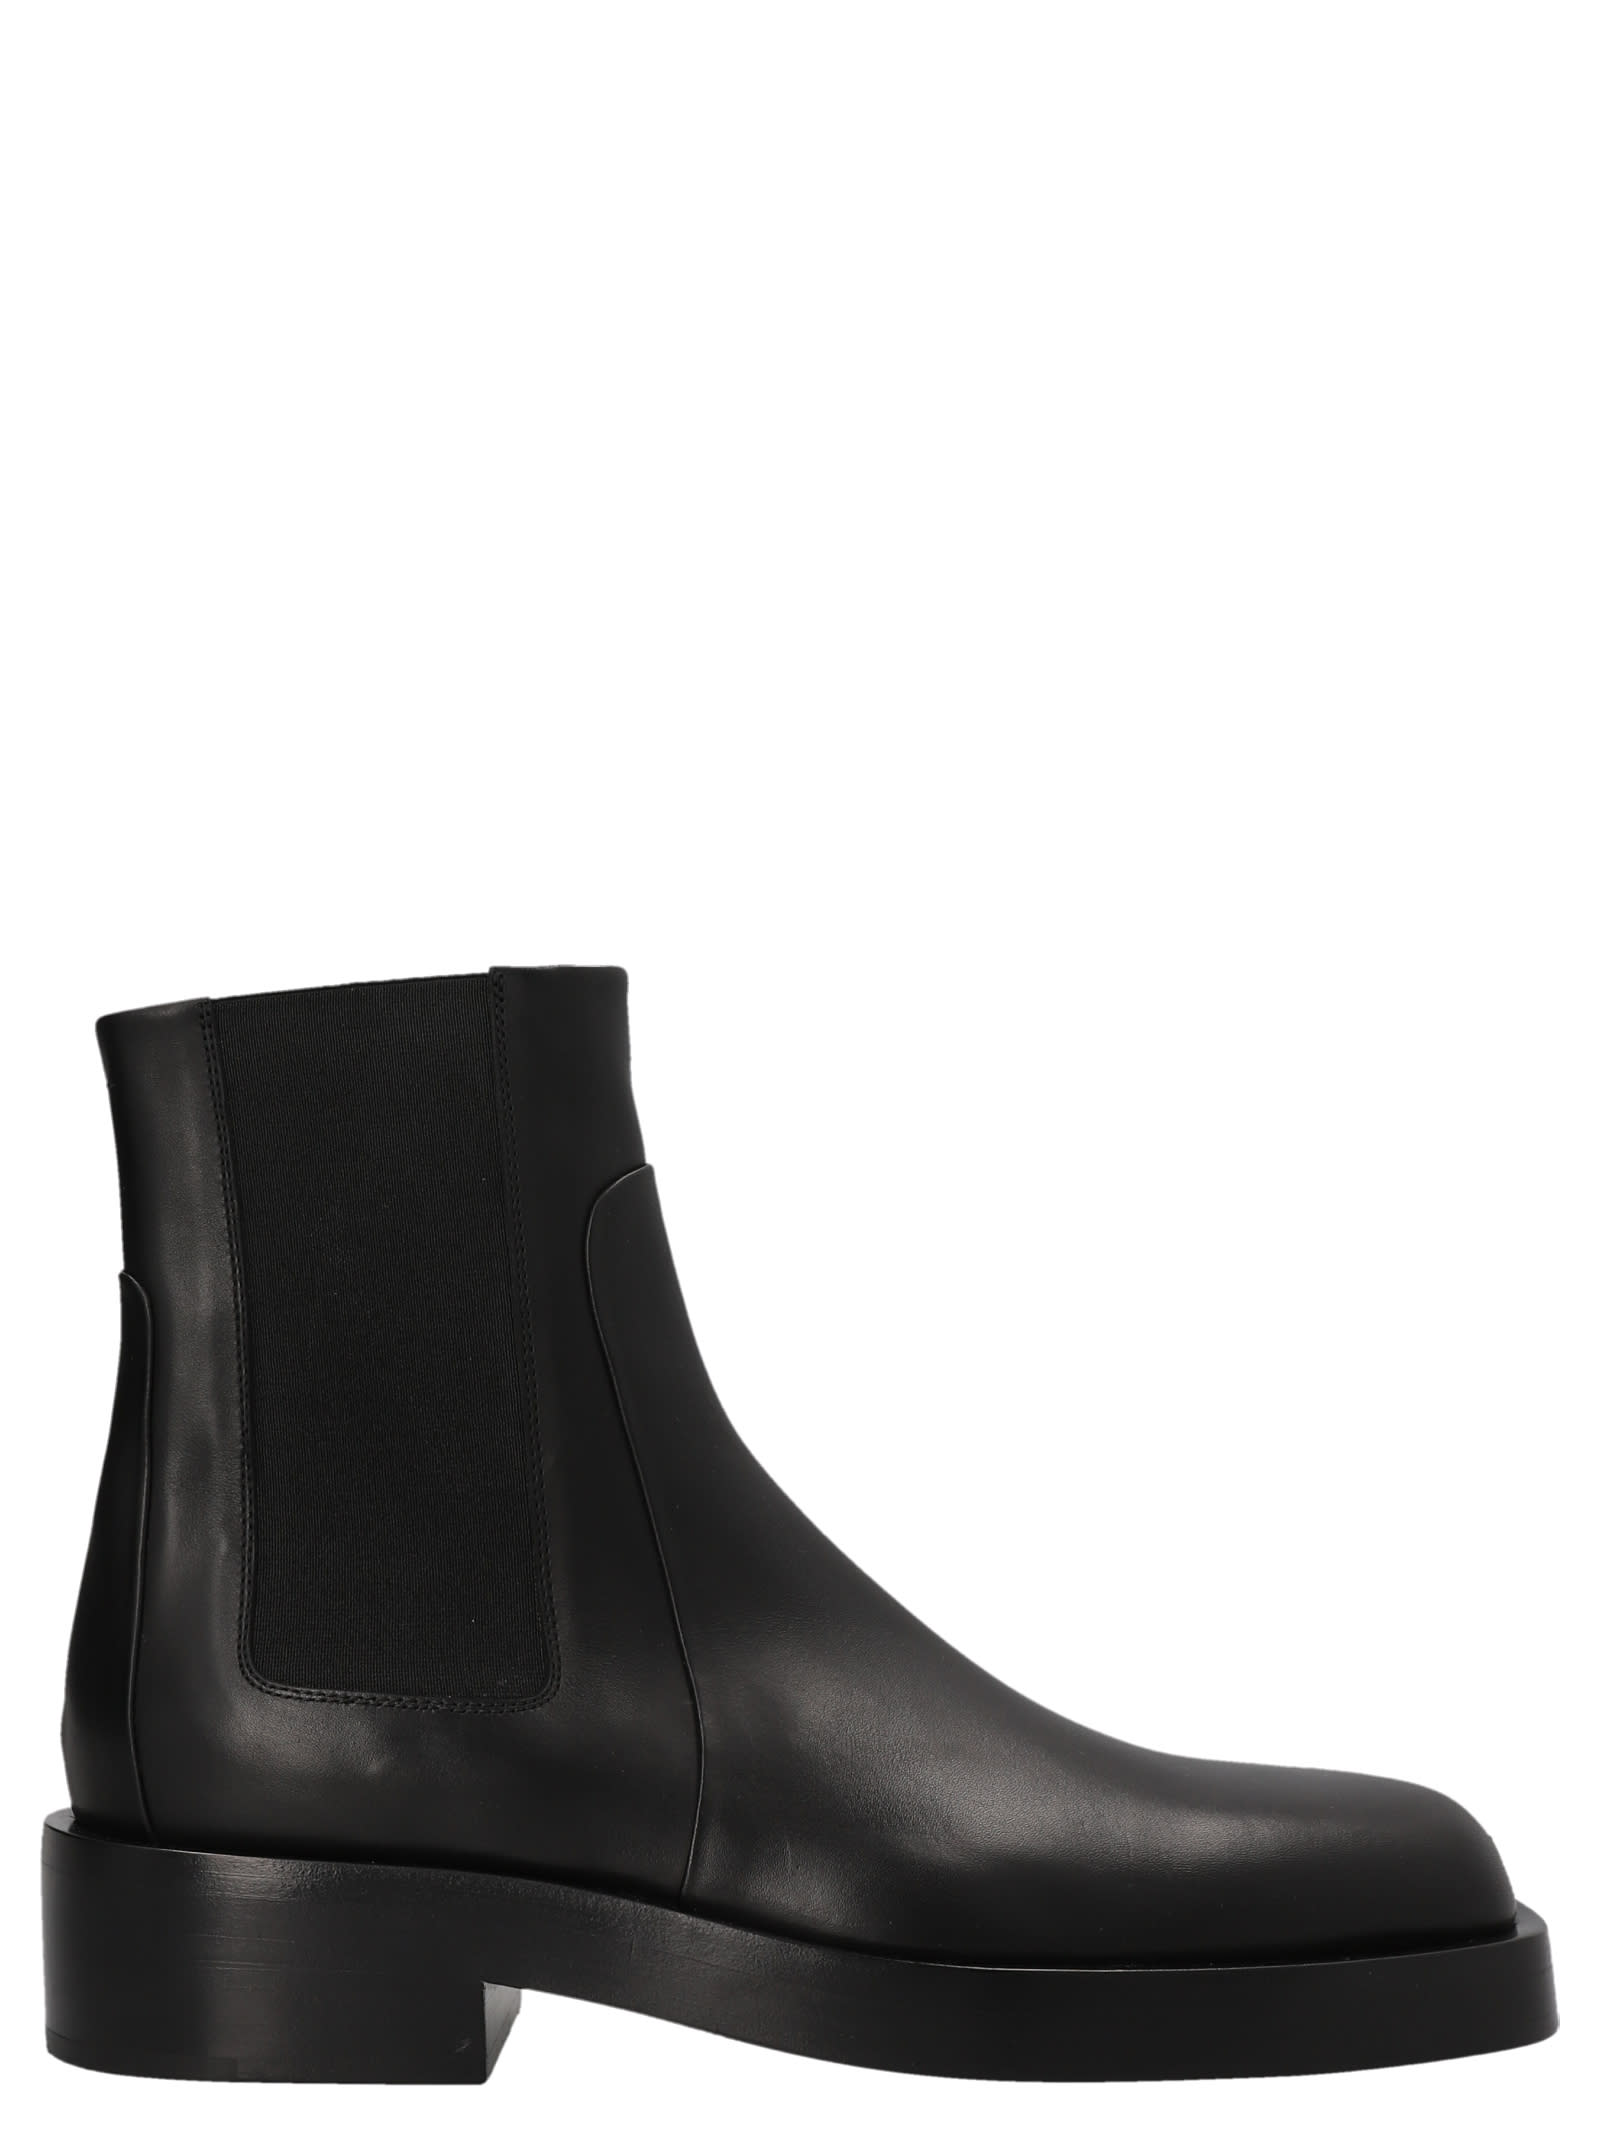 Jil Sander Beatle Leather Ankle Boots In Nero